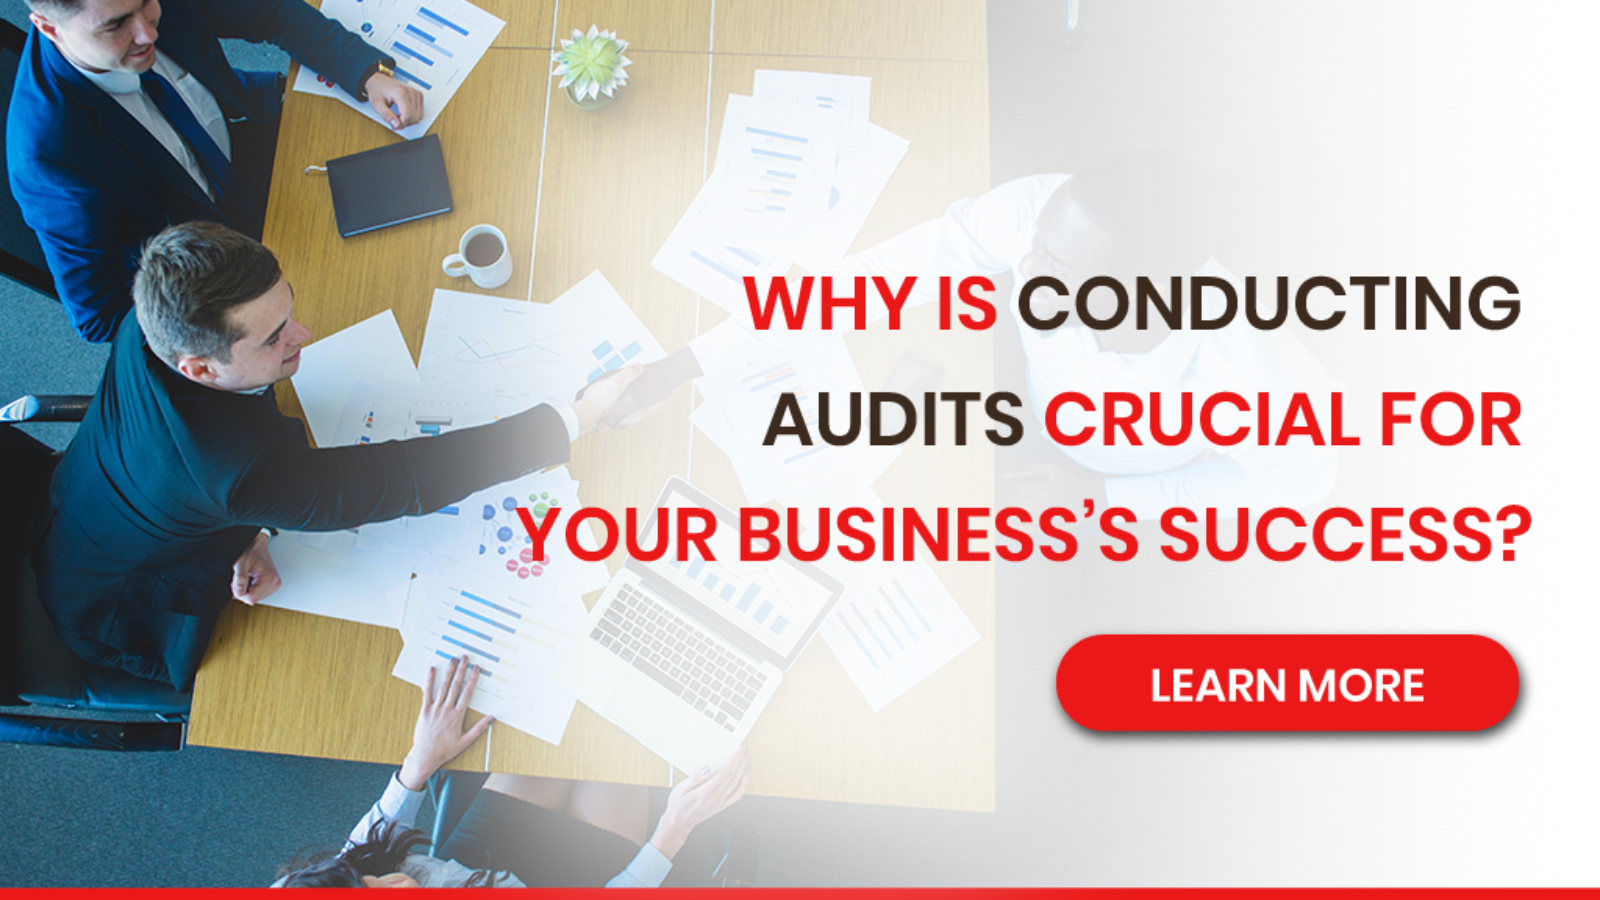 Why is Conducting Audits Crucial for Your Business's Success?